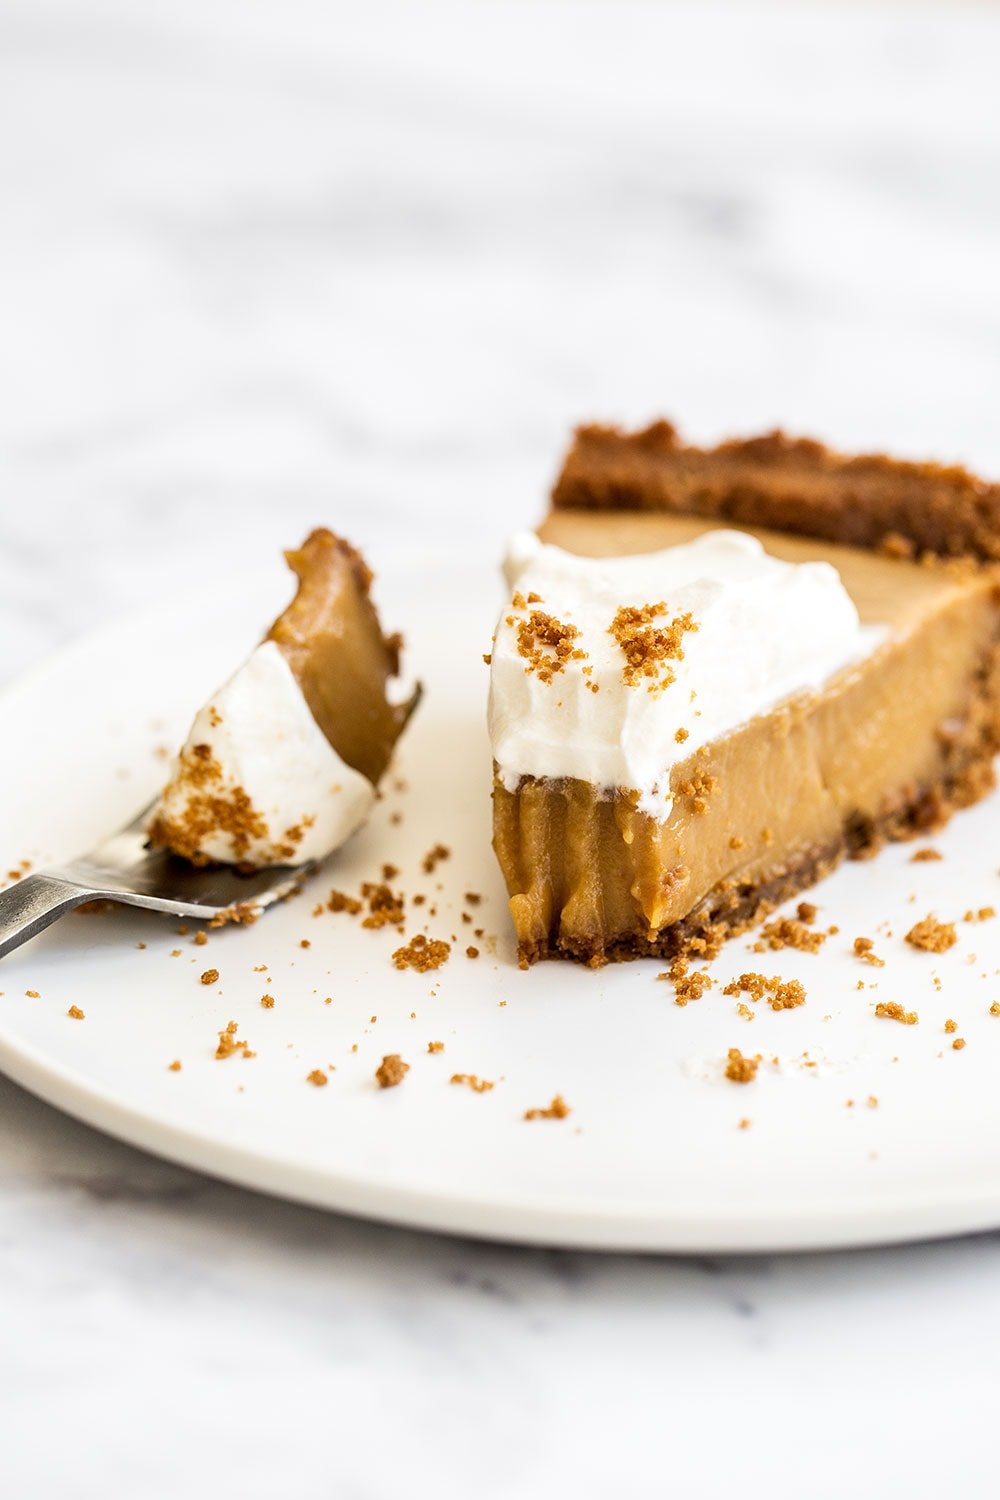 Butterscotch Pie is made with an easy spiced Biscoff cookie crust, homemade butterscotch pudding filling, and is topped with creamy whipped cream. Perfect fall treat!